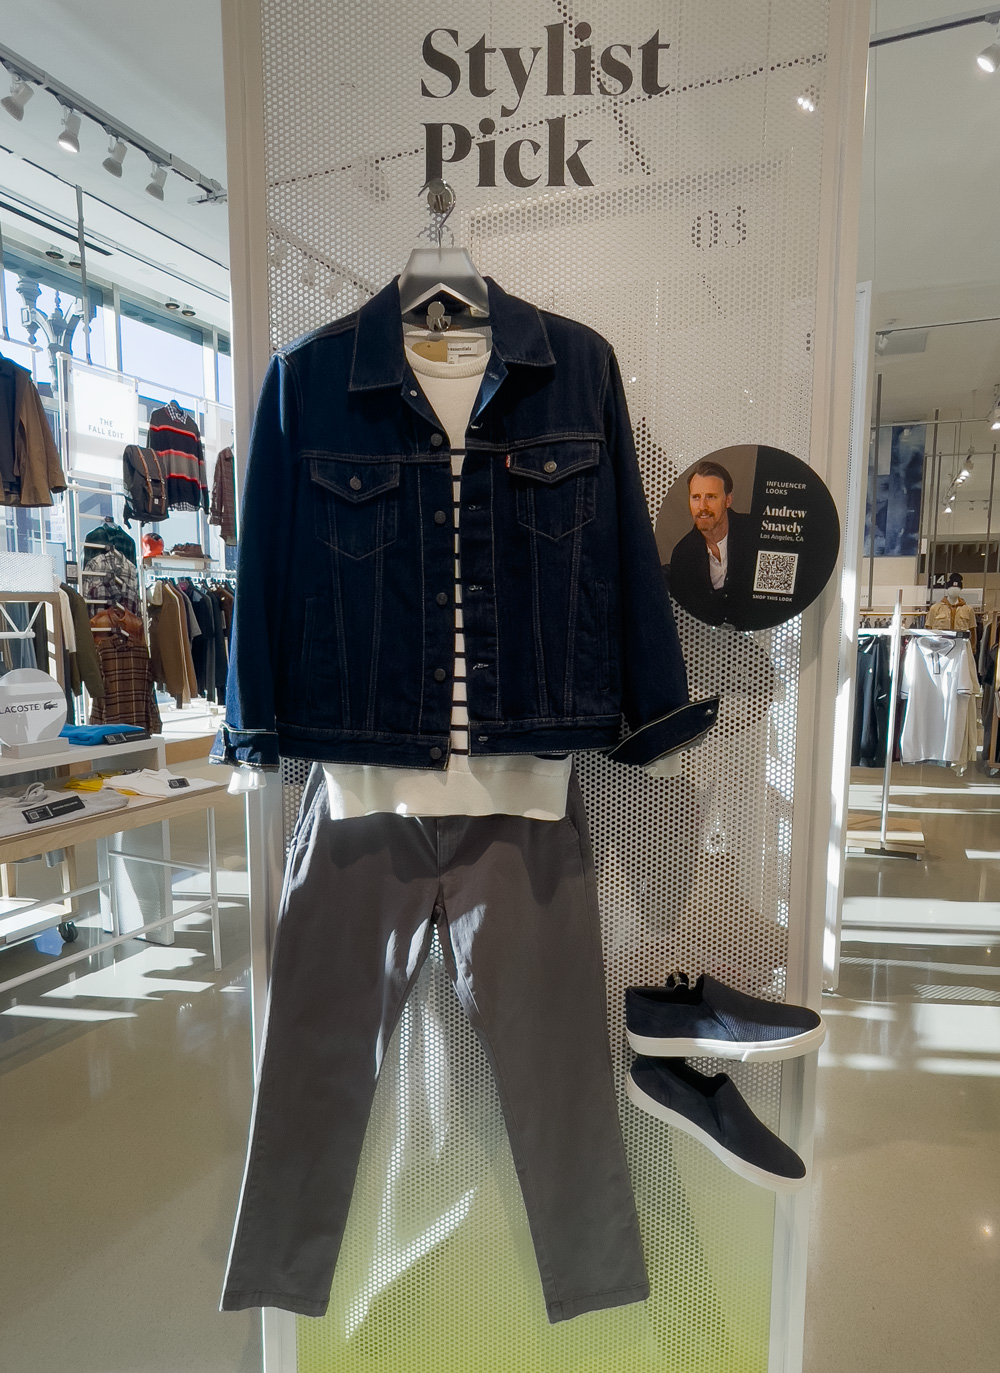 Casual outfit idea featured in Amazon-style store featuring trucker jacket, striped blazer, chinos, and loafers